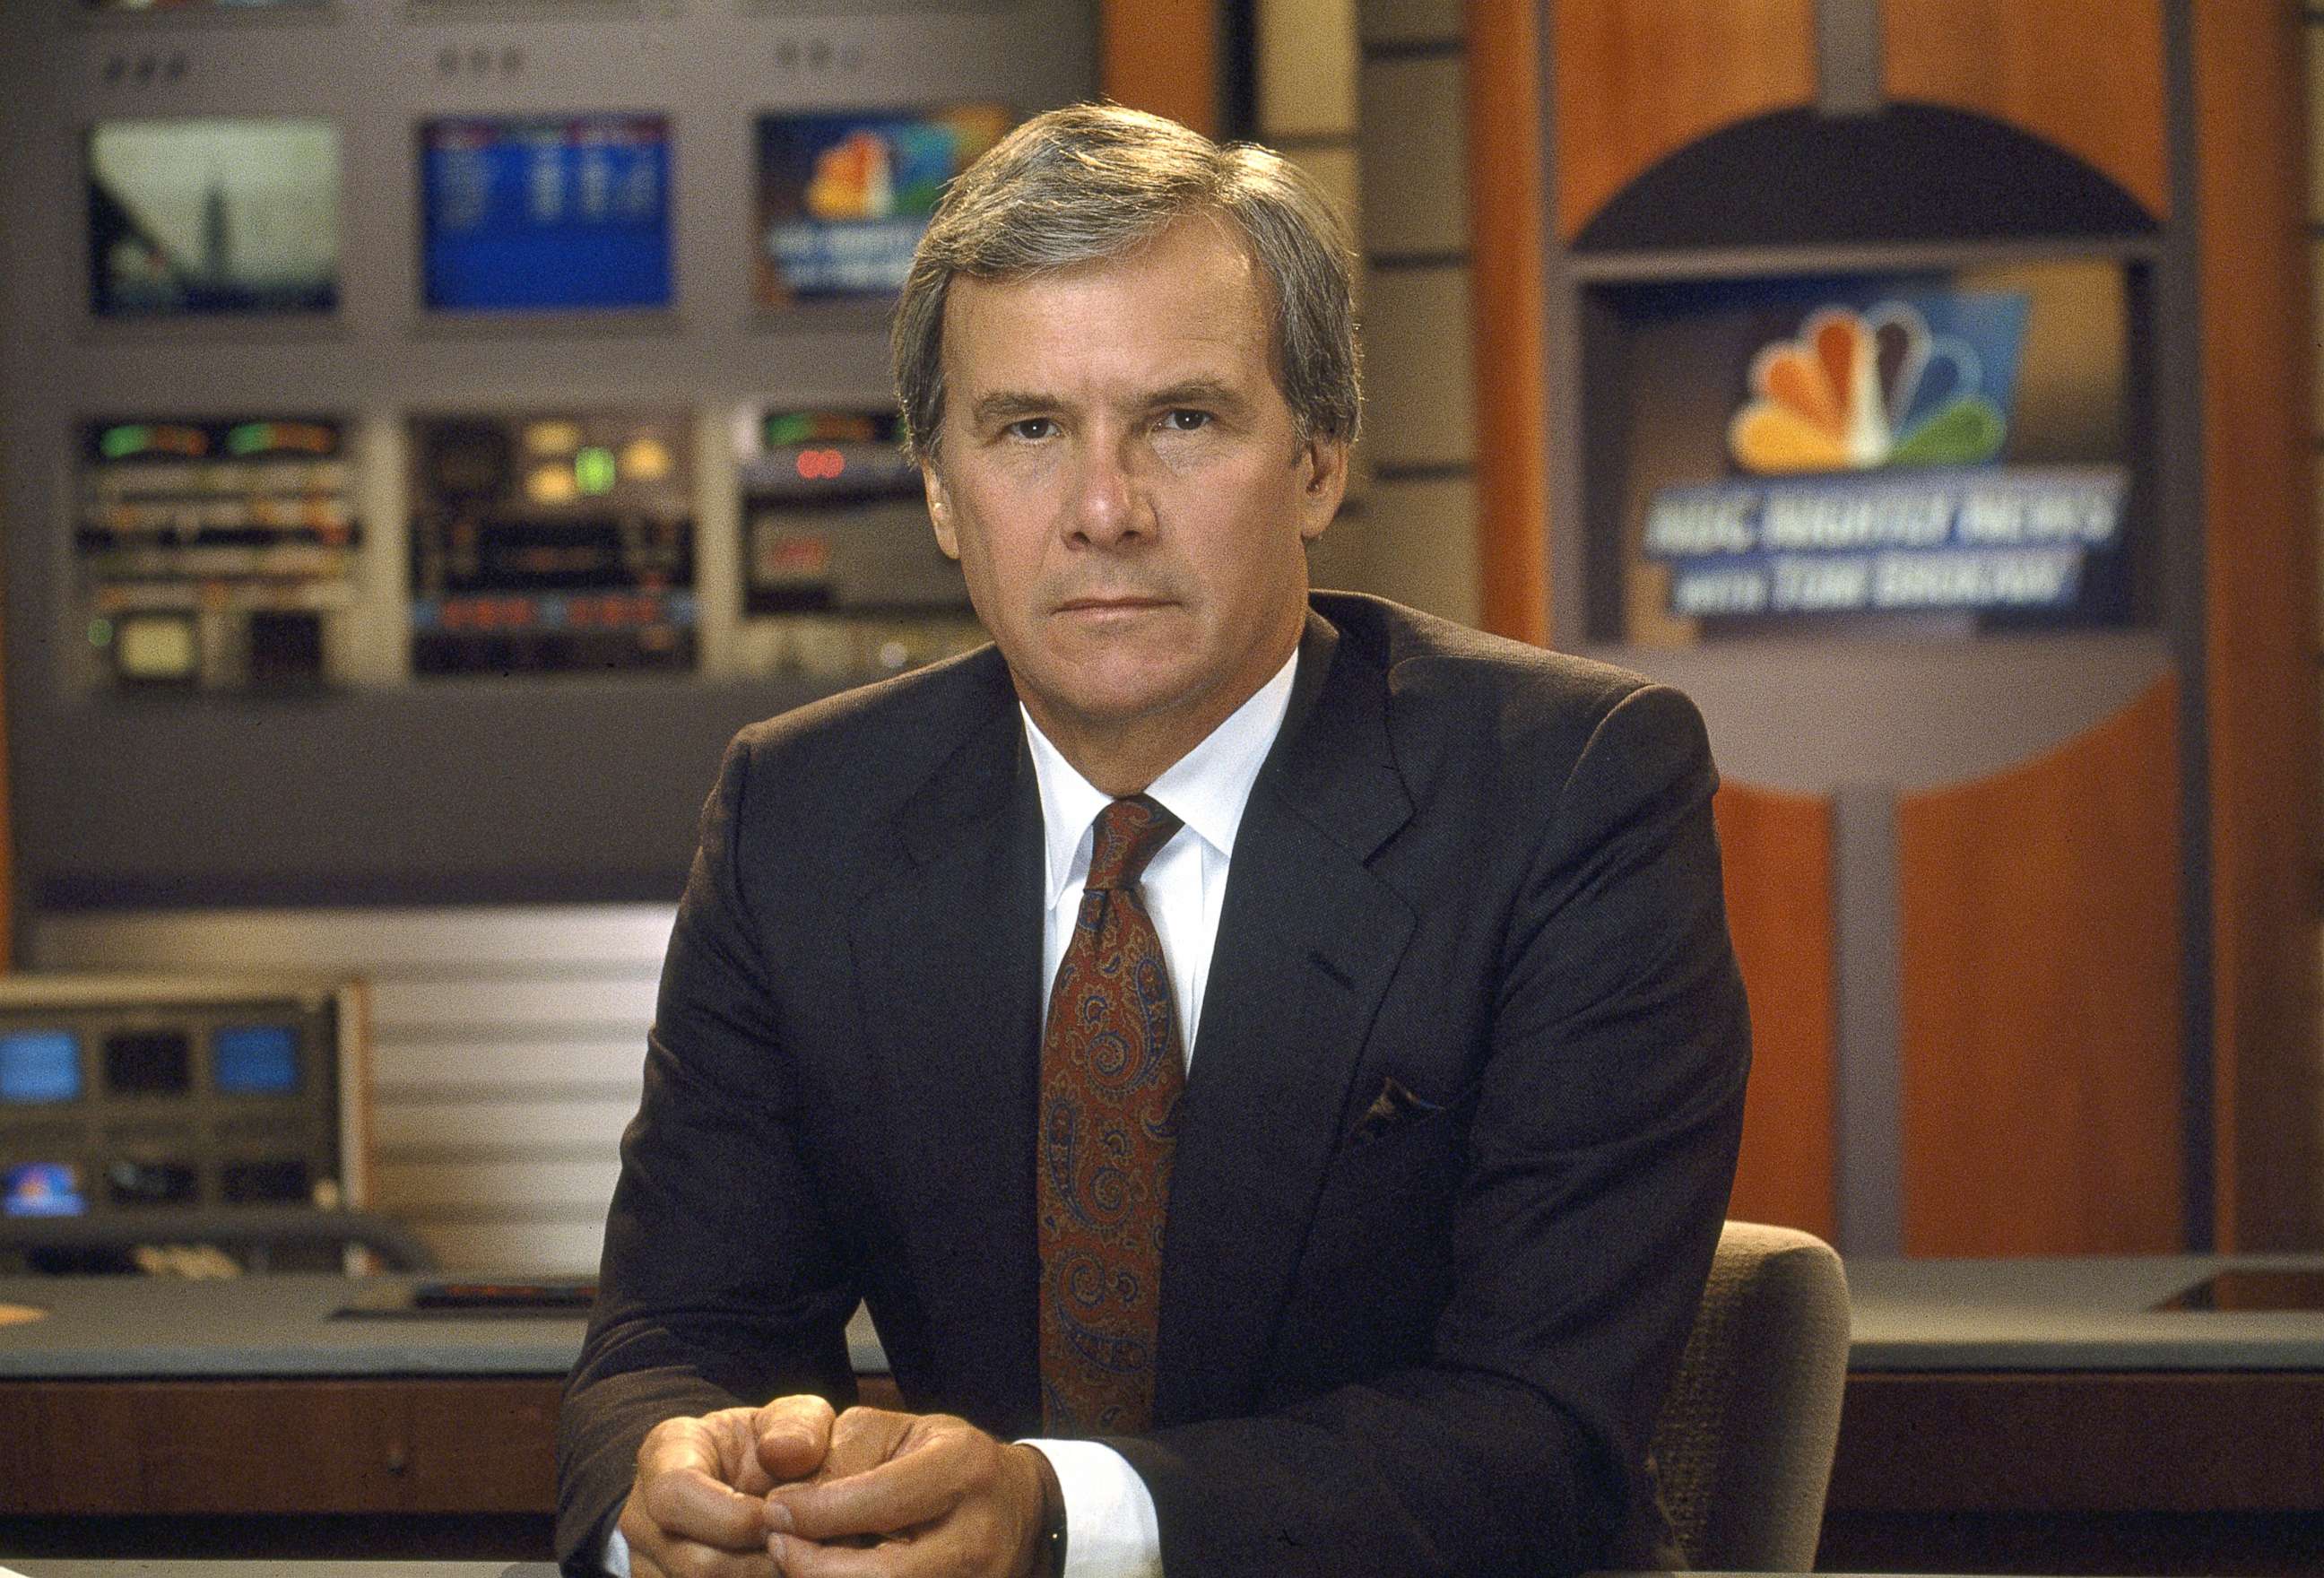 PHOTO: In this file image dated March 6, 2012 is Anchor Tom Brokaw of NBC Nightly News With Tom Browkaw.